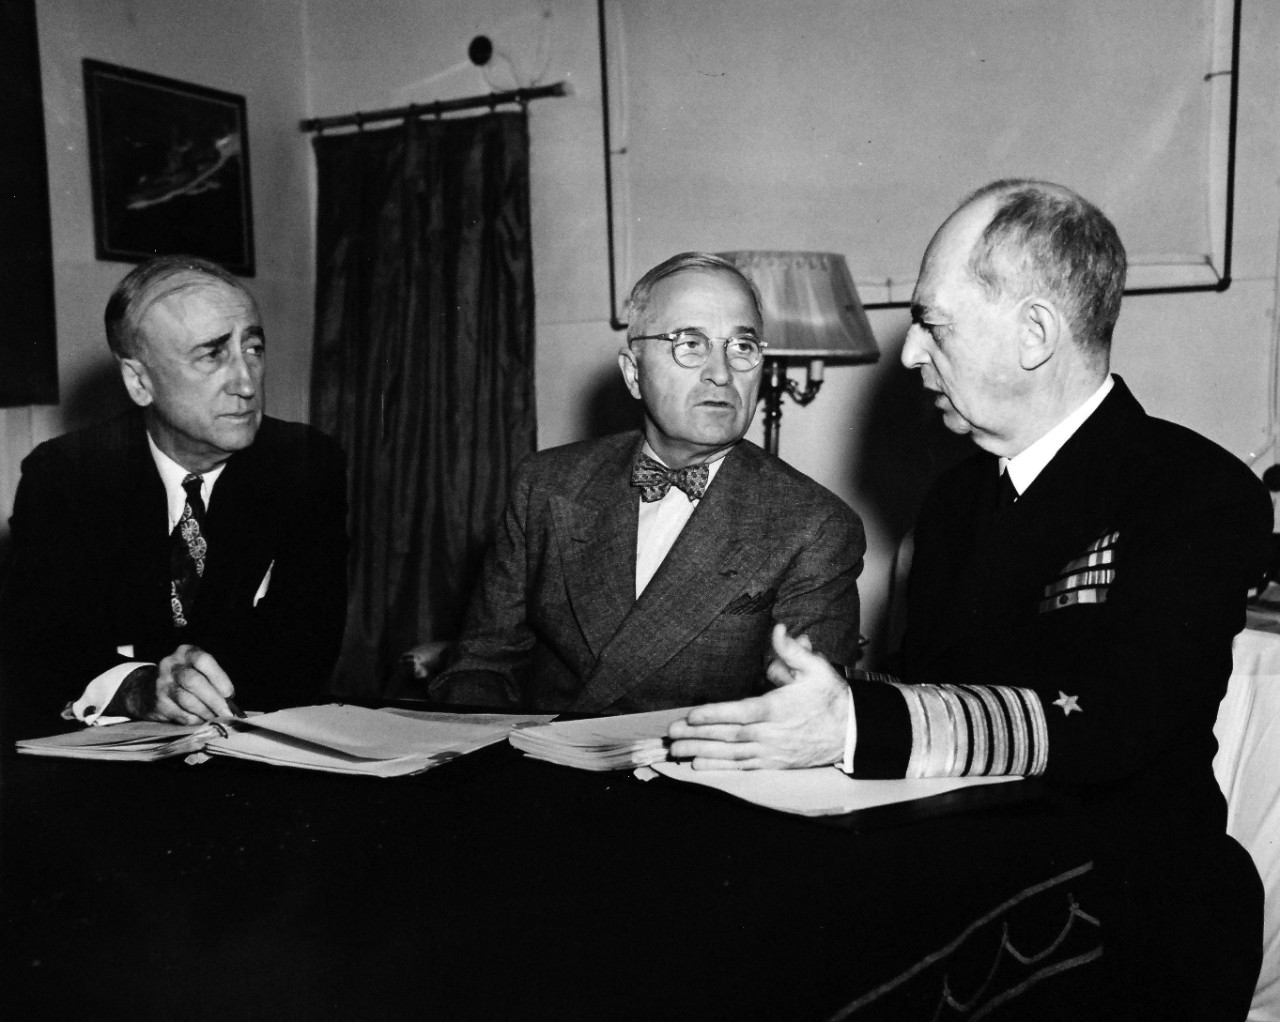 80-G-49927:  Potsdam Conference,  July-August 1945.  President Harry S. Truman onboard USS Augusta (CA-31) en-route to Antwerp for the “Big Three” Conference.  Shown:  (left to right) Secretary of State James F. Byrnes, President Truman, and Admiral William D. Leahy, USN, in Mr. Byrnes cabin.   Photograph received July 18, 1945.  Official U.S. Navy Photograph, now in the collections of the National Archives.  (2016/02/23).